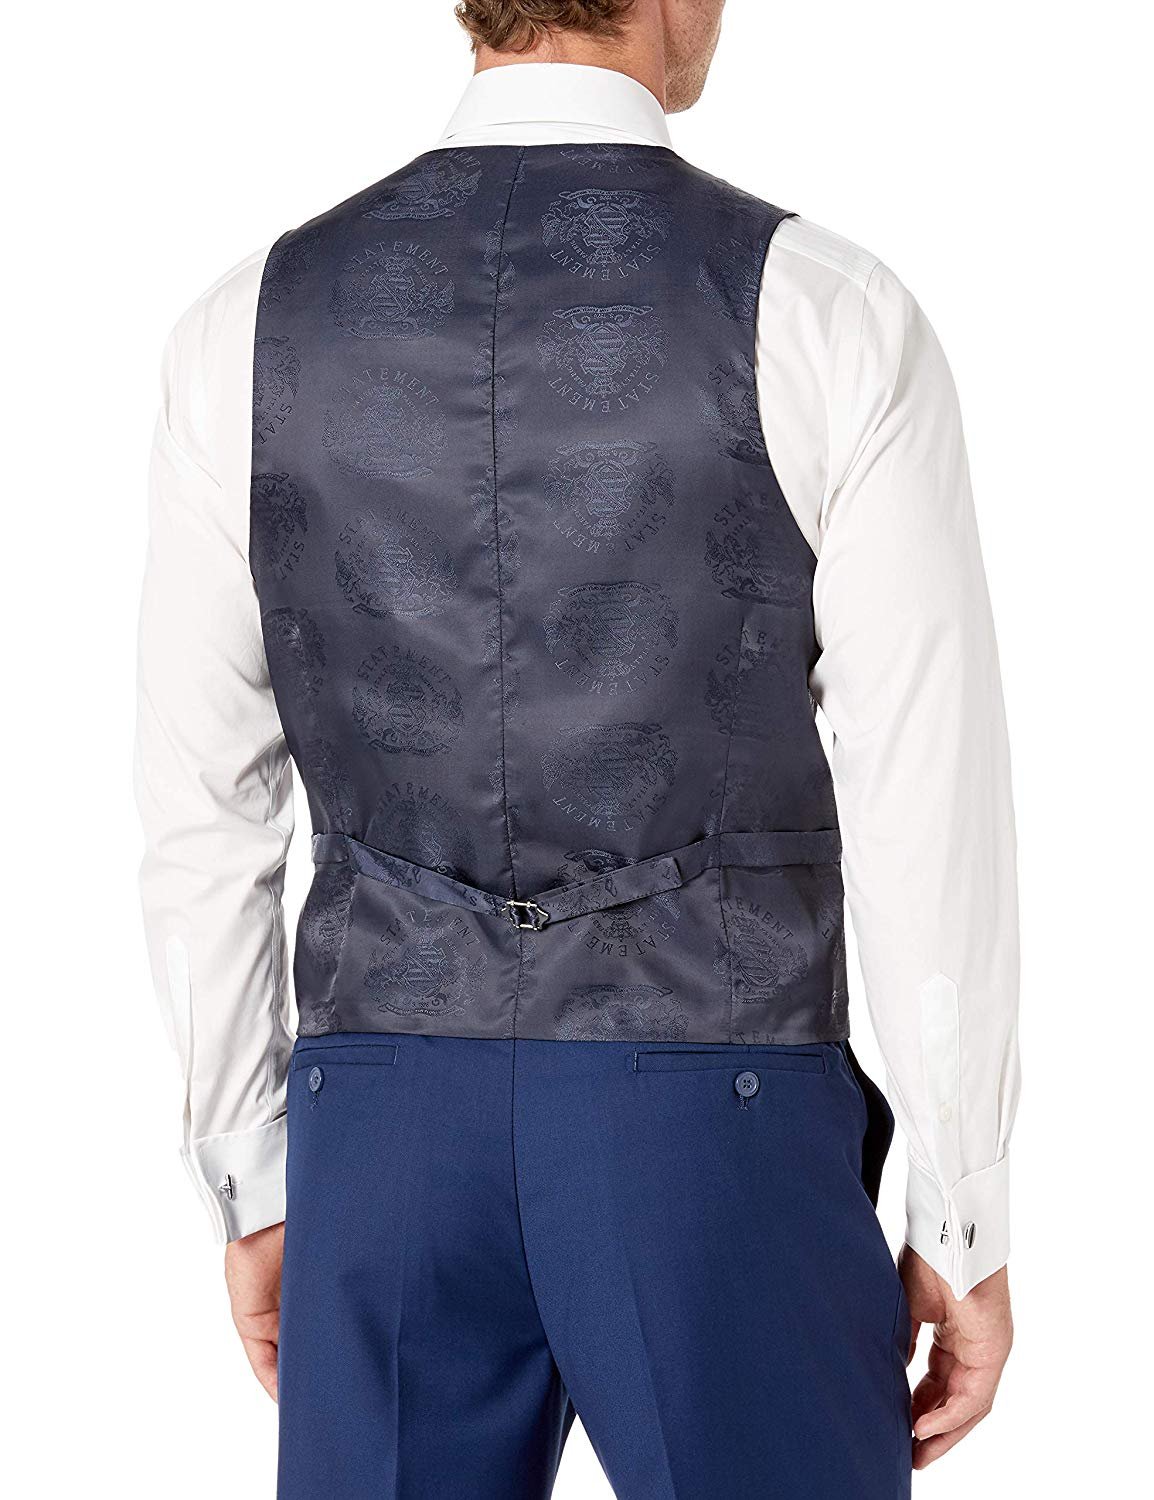 Adam Baker by Statement Men's Single Breasted Three Piece Shawl Collar Tuxedo - Sapphire Contrast - 56R - image 3 of 6